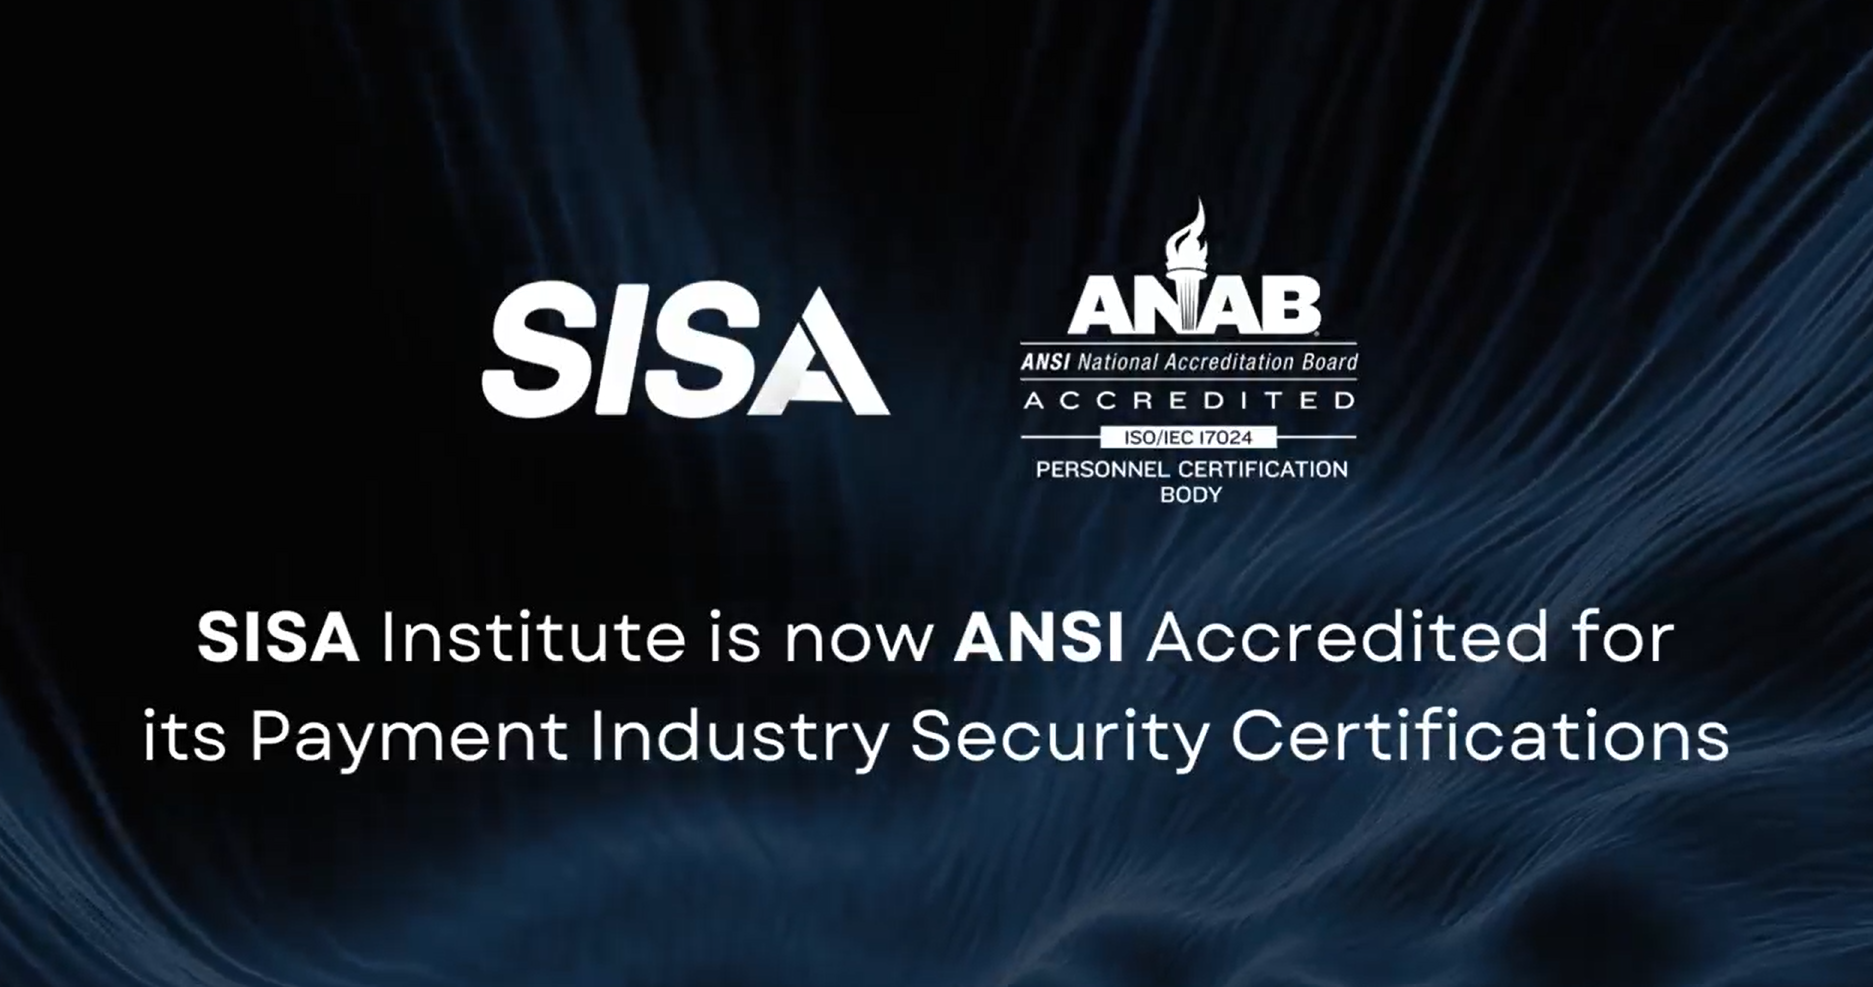 SISA Institute achieves ANAB Accreditation for Payment Industry Security Certification Programs